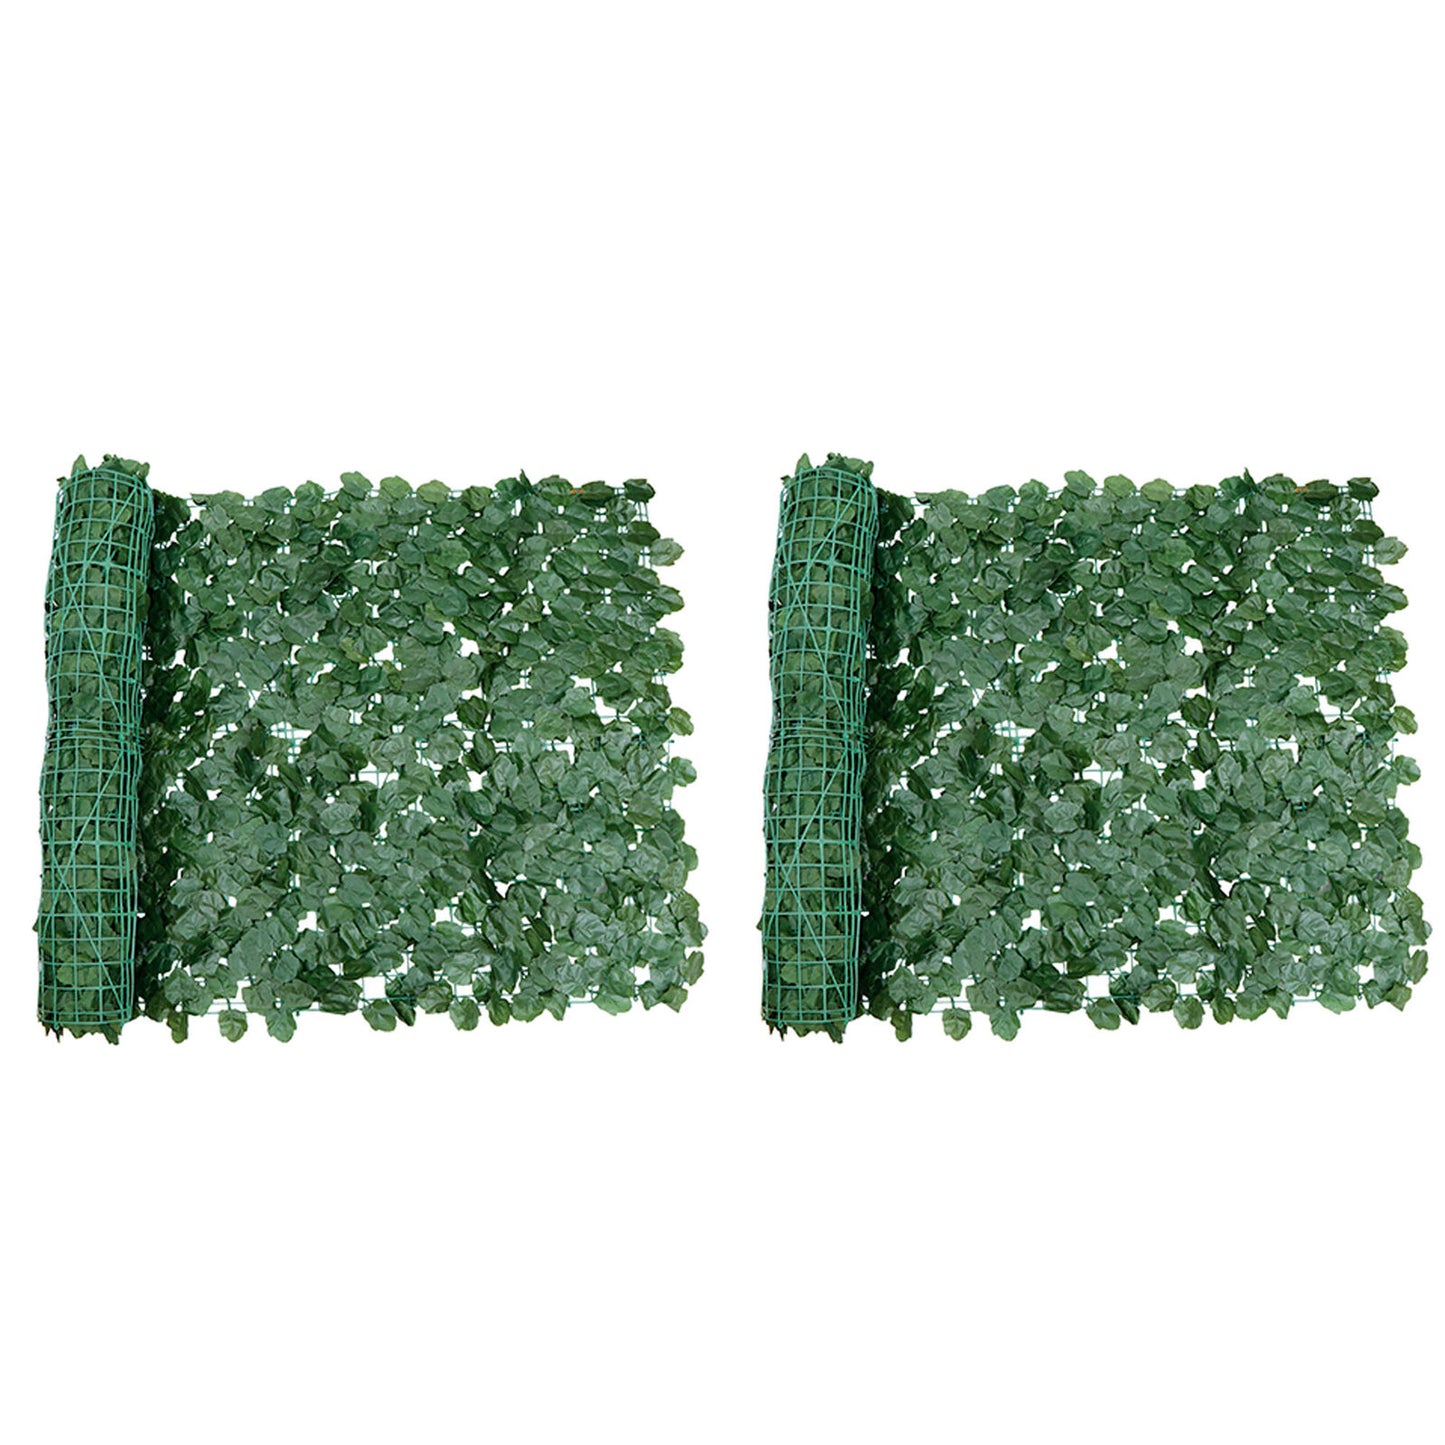 Privacy Fence Screen Artificial 98"X39" Faux Ivy Hedge Fencing Outdoor Decor X2